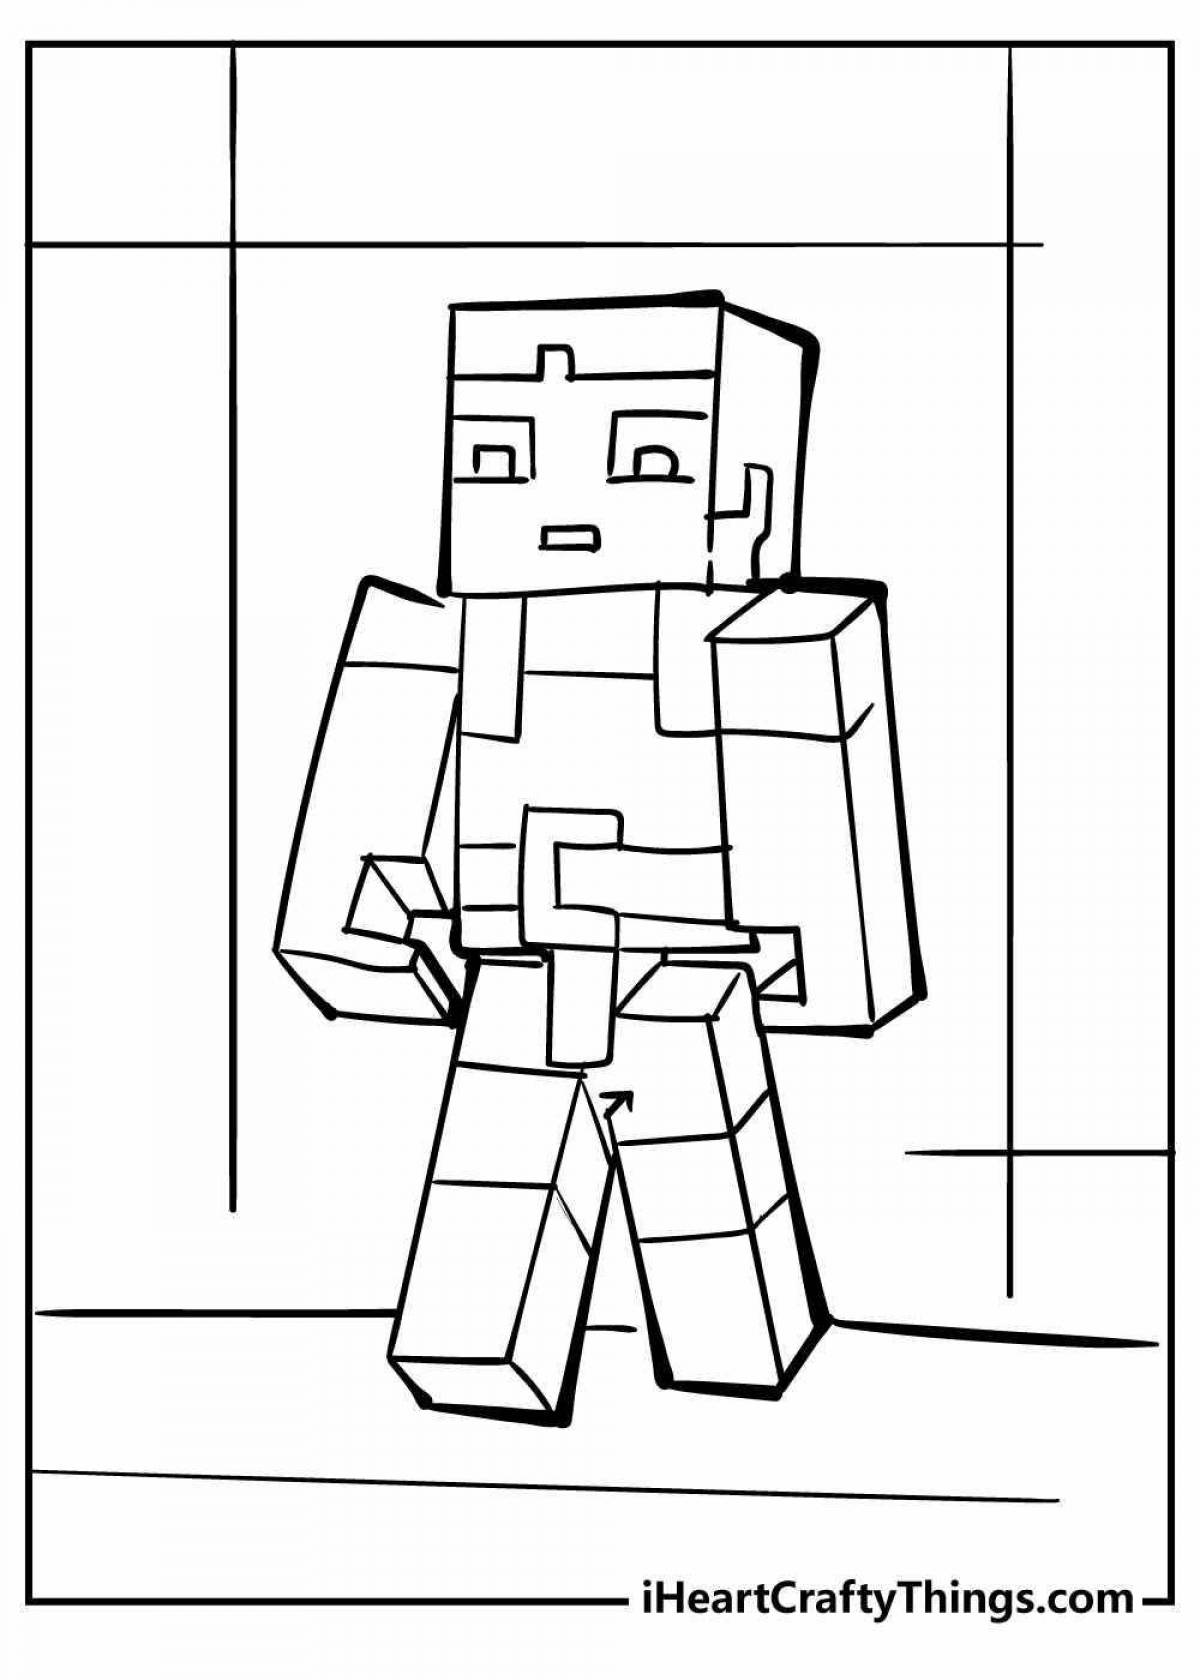 Fascinating minecraft armor coloring page